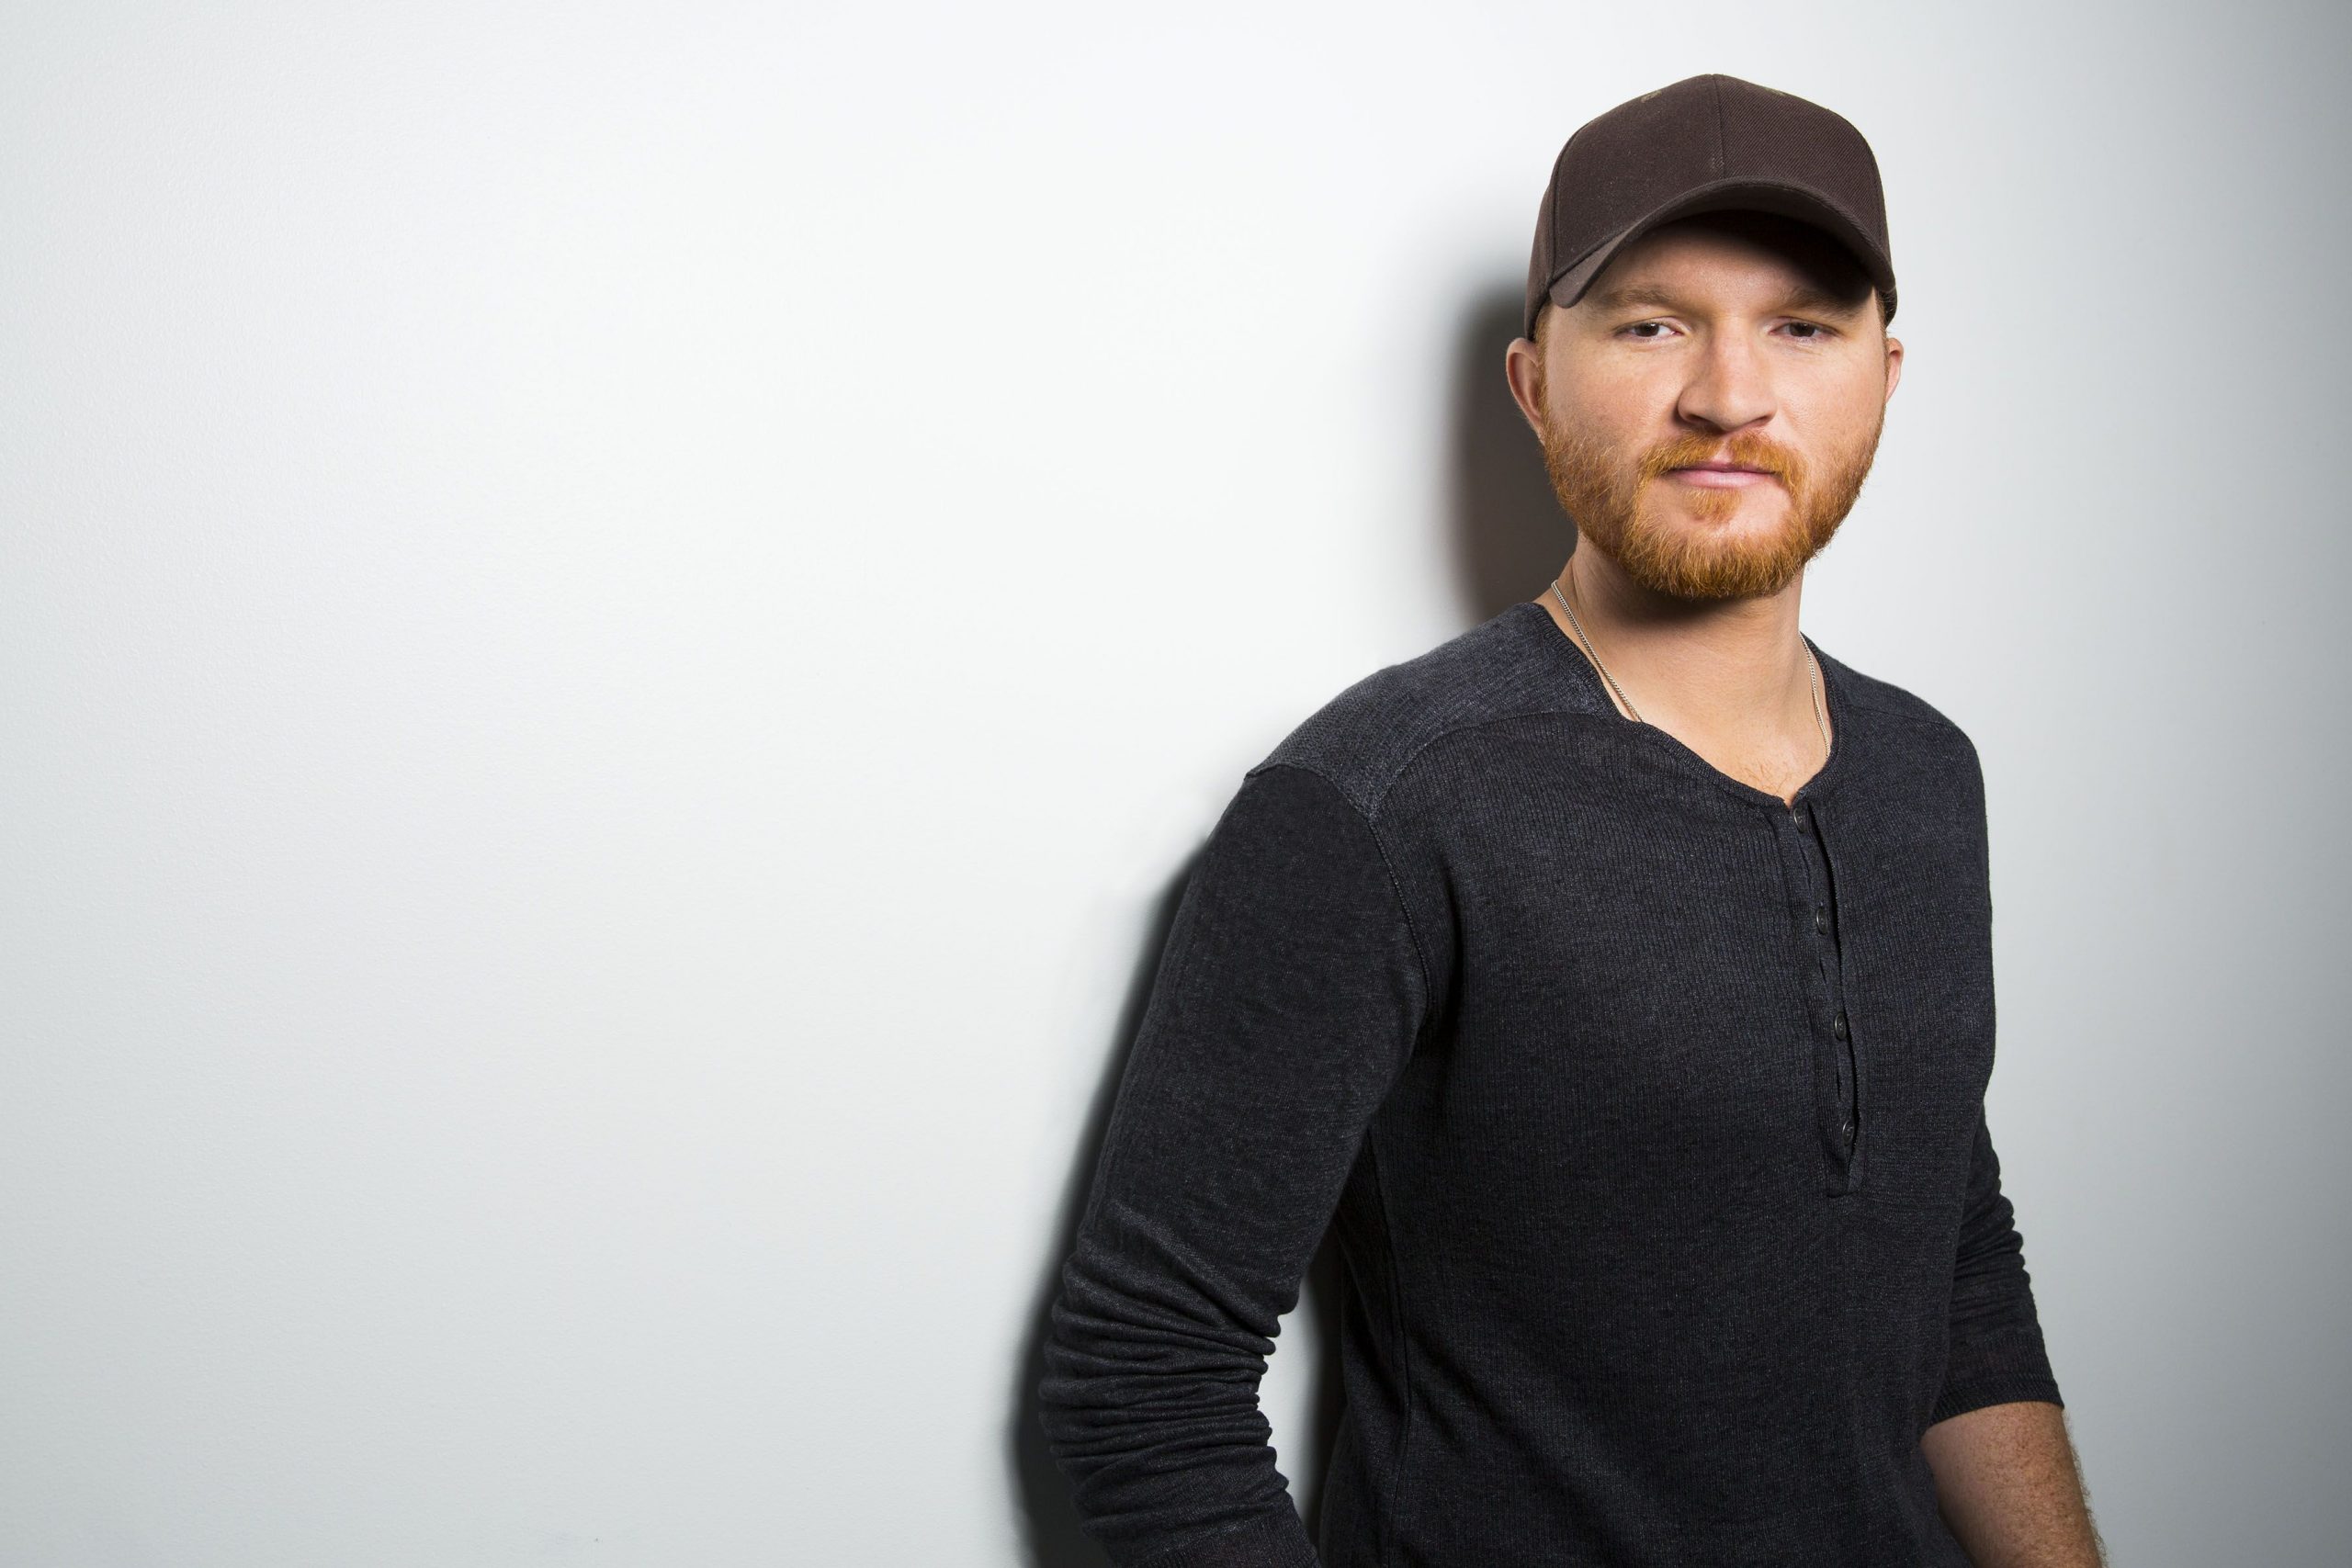 Eric Paslay’s “High Class” Song Featured in Upcoming ESPN/ABC College Football Postseason